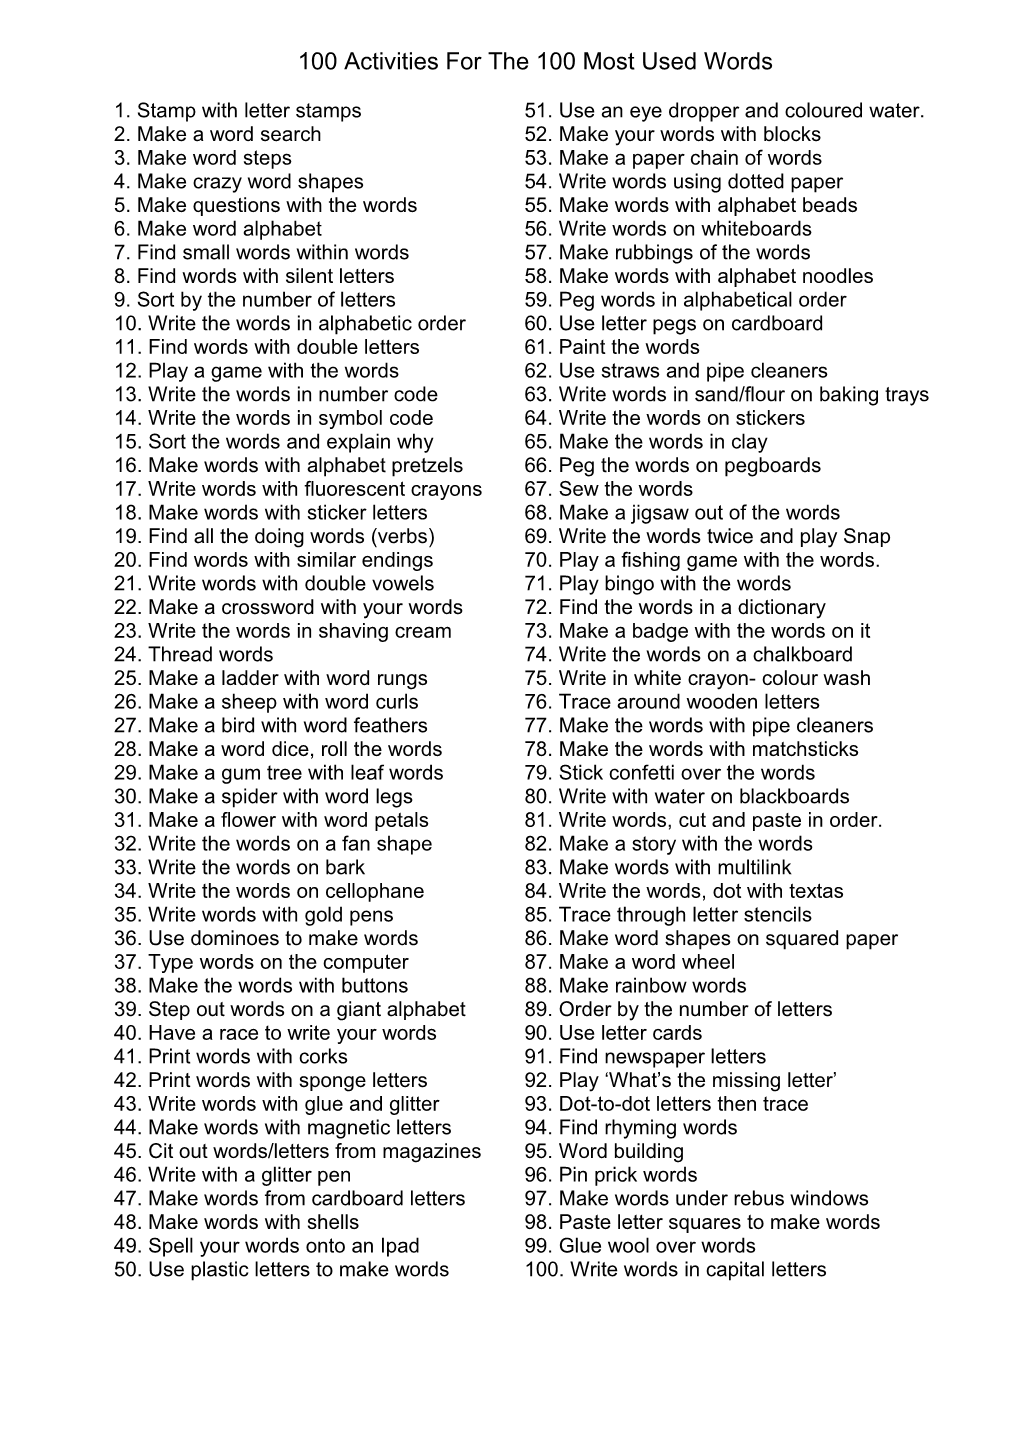 100 Activities for the 100 Most Used Words